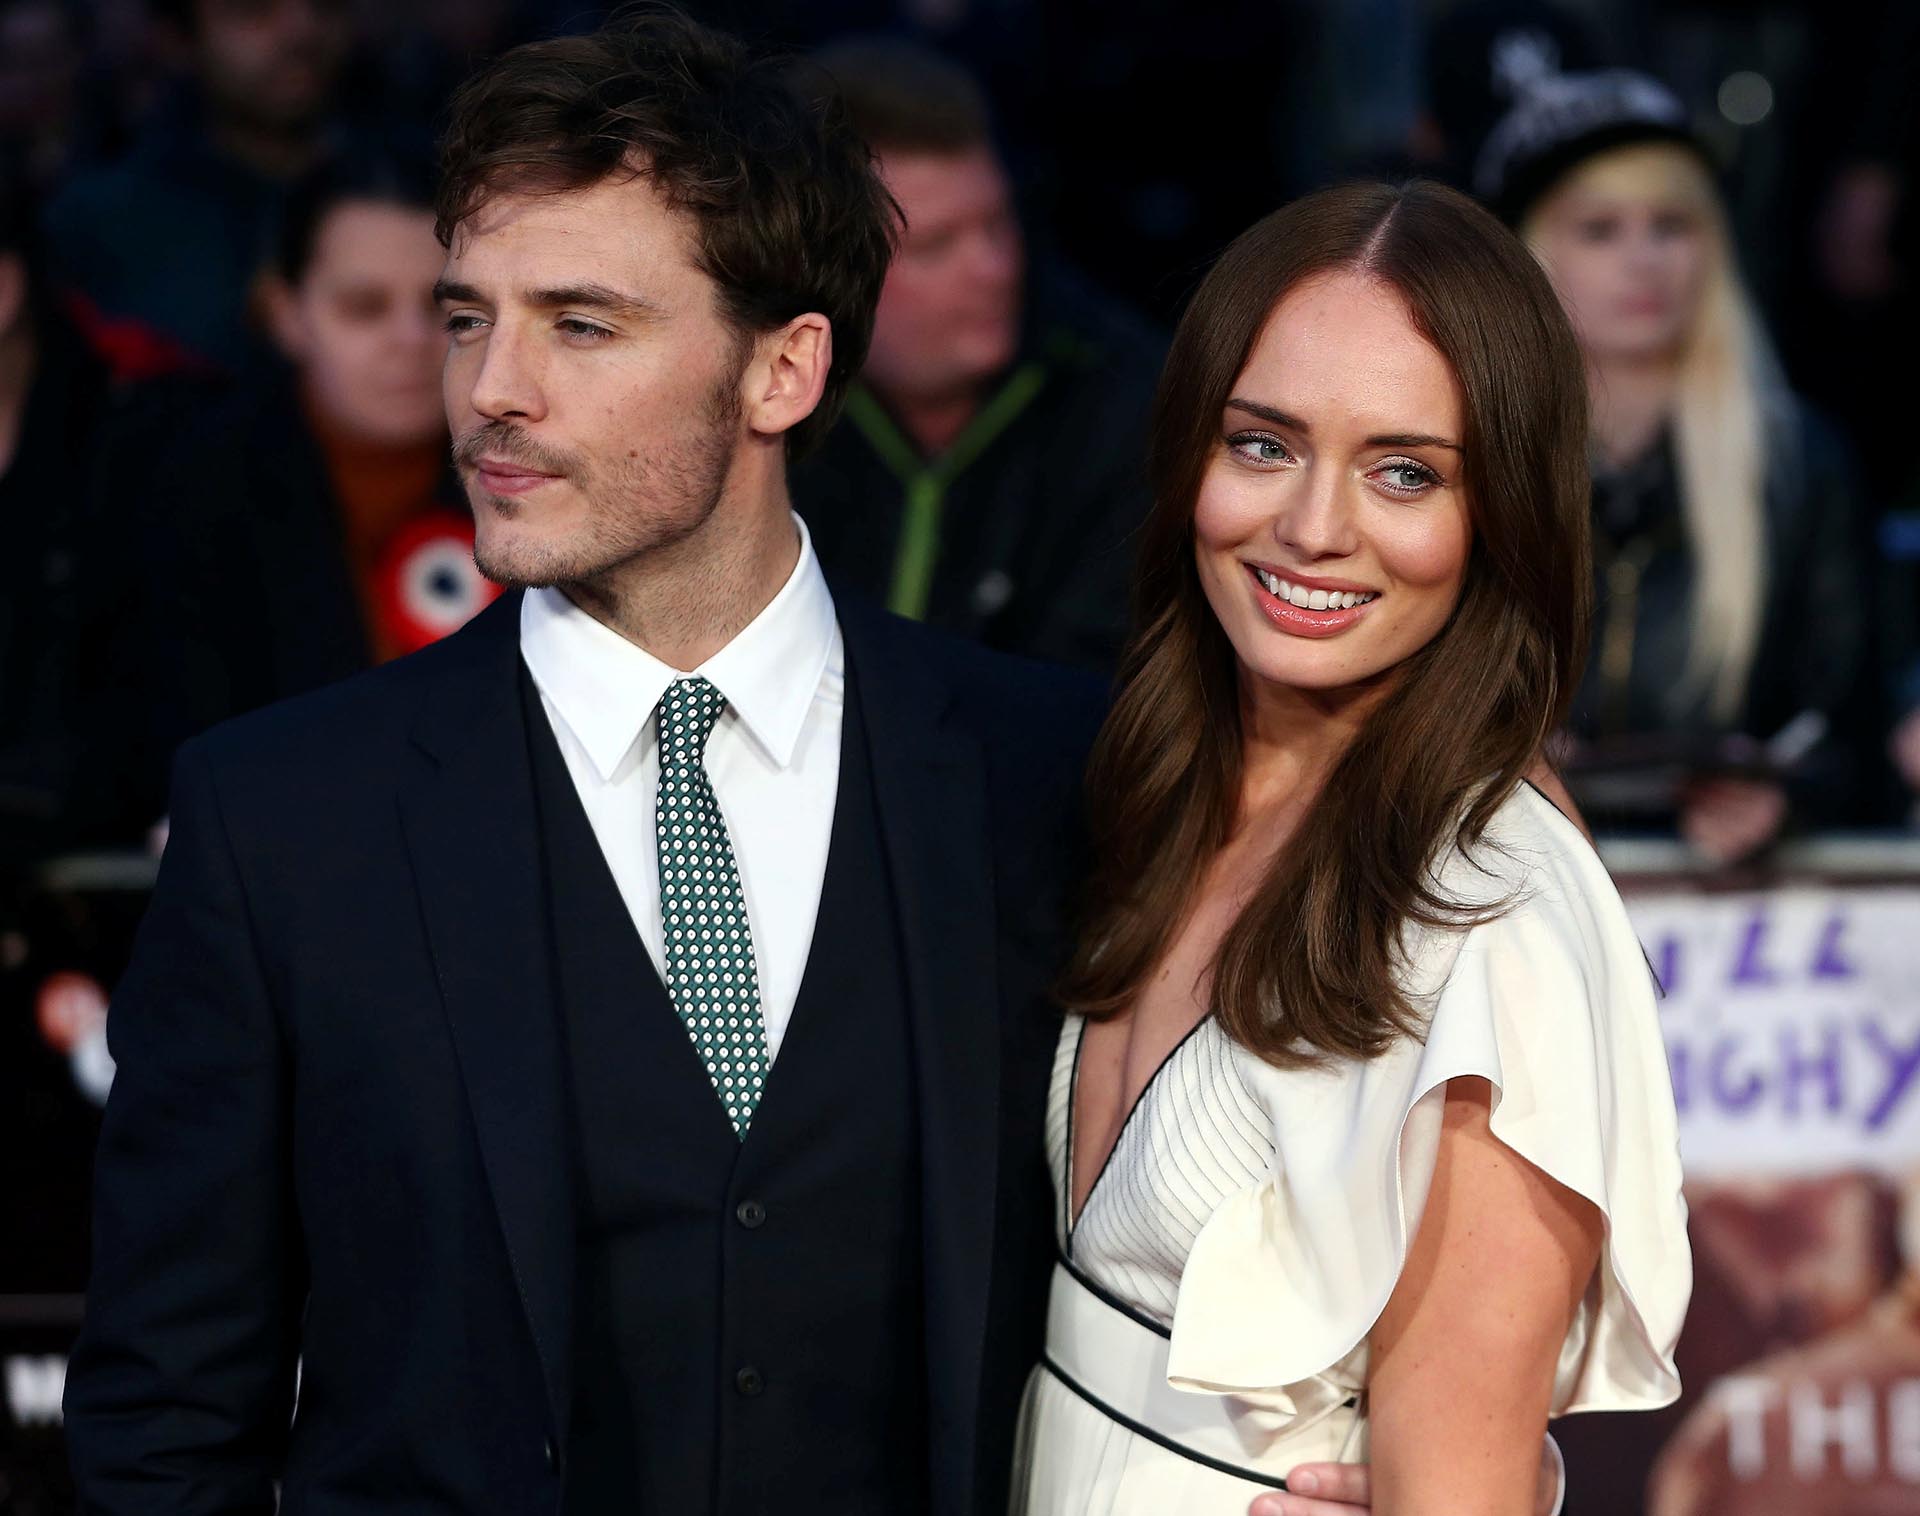 Sam Claflin will star in a supernatural thriller directed by Colm McCarthy.  (REUTERS/Neil Hall)